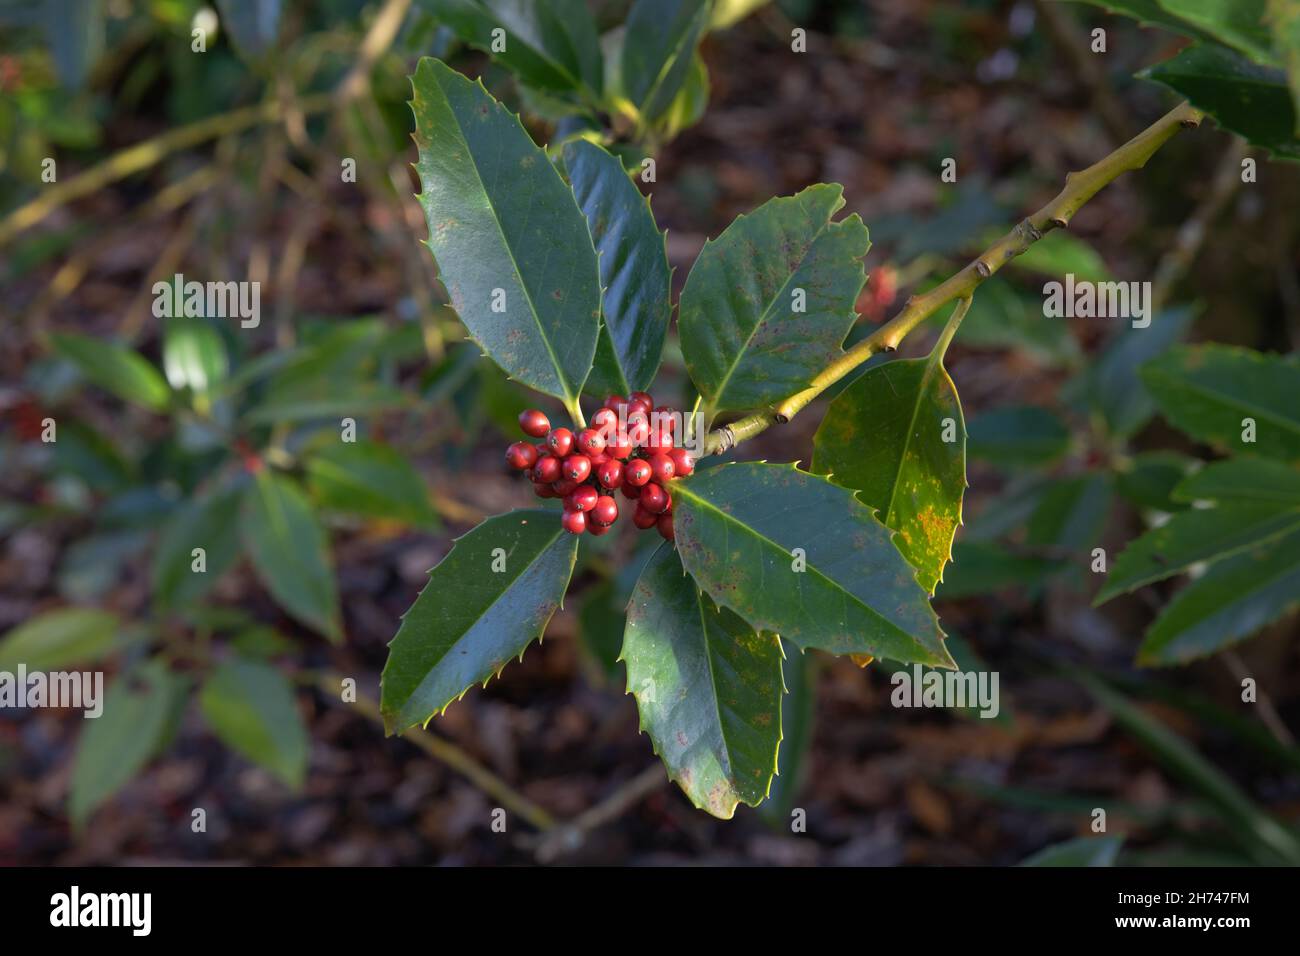 Berries and leaves of the ilex x koehneana, the chestnut leave holly, isolated against against the background Stock Photo